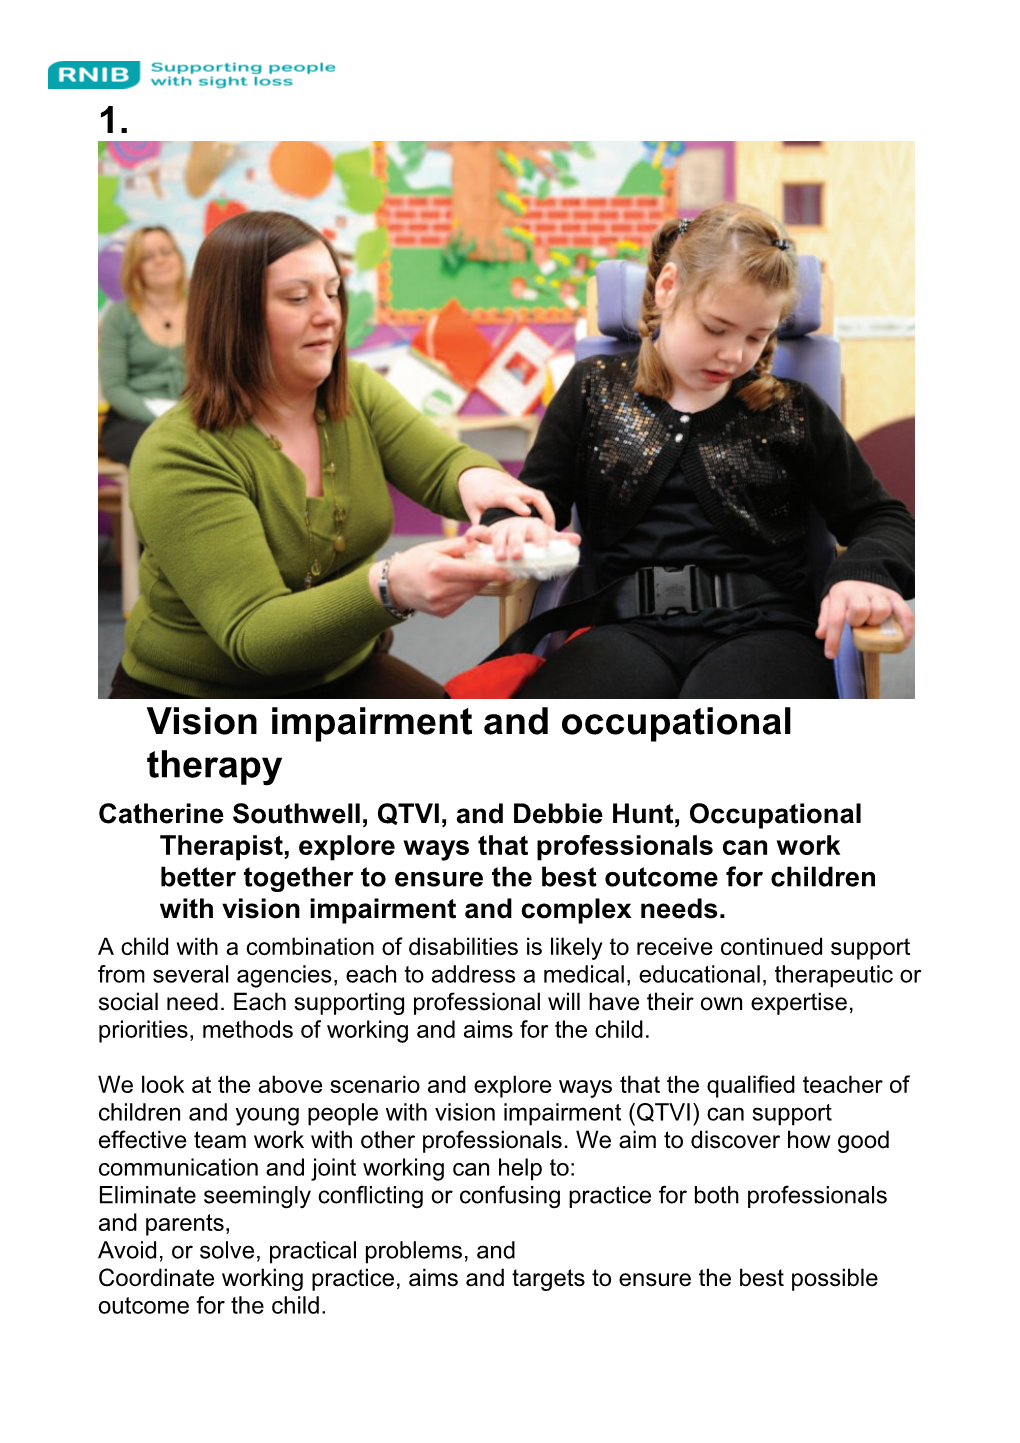 Vision Impairment and Occupational Therapy